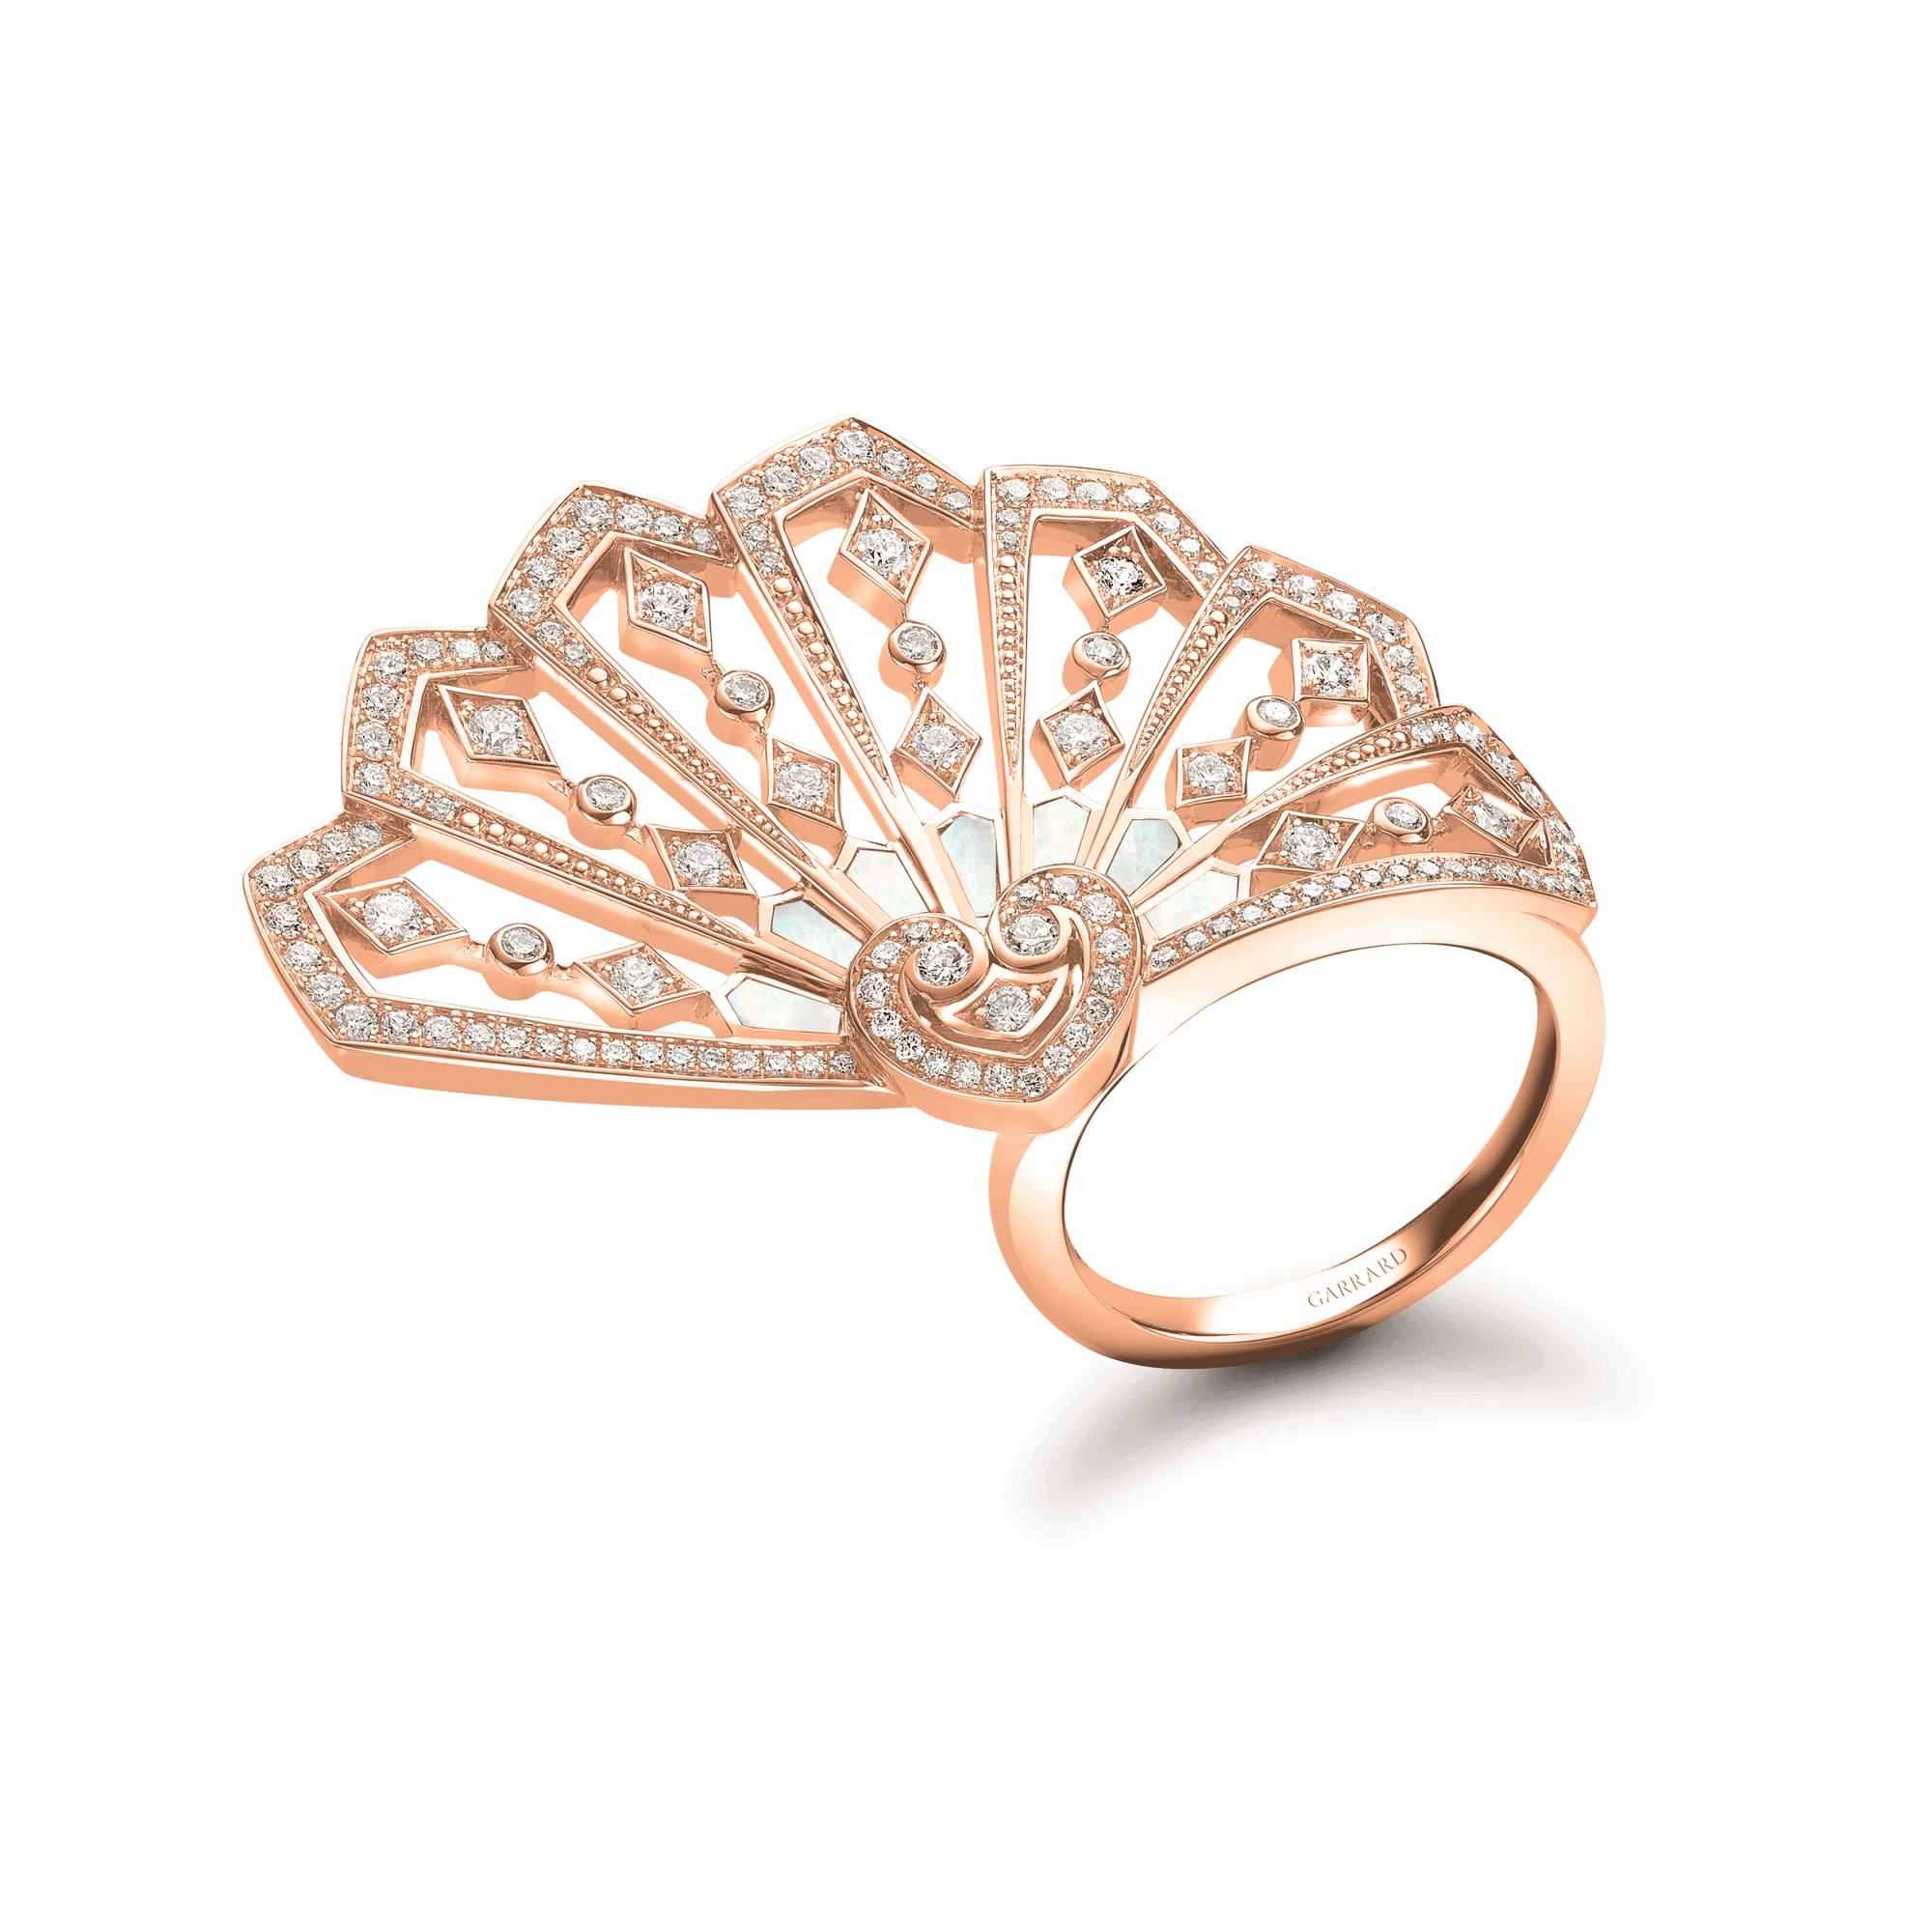 Garrard Fanfare Classic jewellery collection white diamond and mother of pearl ring in 18ct rose gold 2015512 Hero View